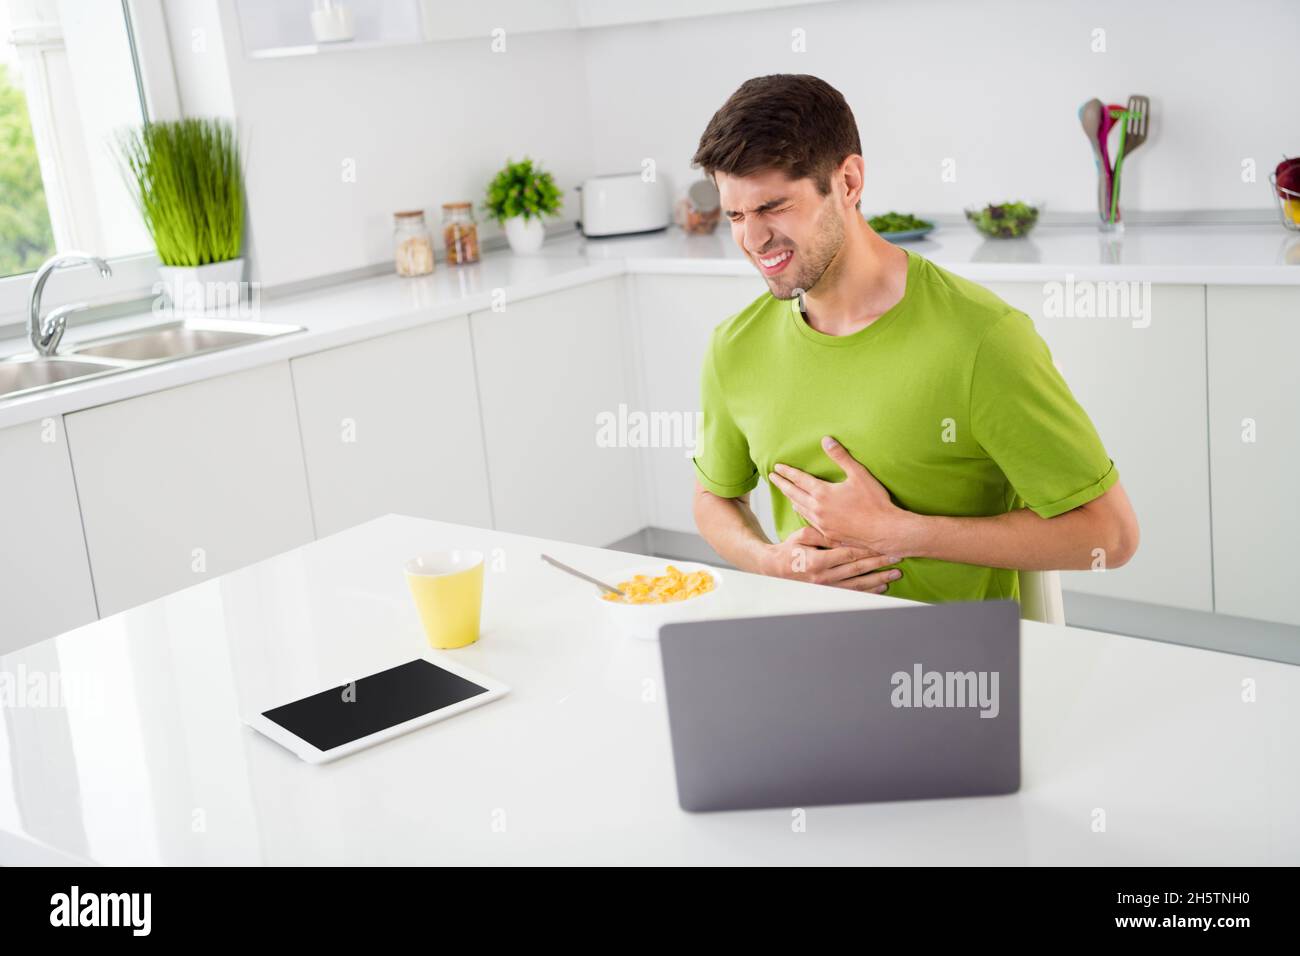 Portrait photo man using laptop suffering from belly ache while breakfast Stock Photo